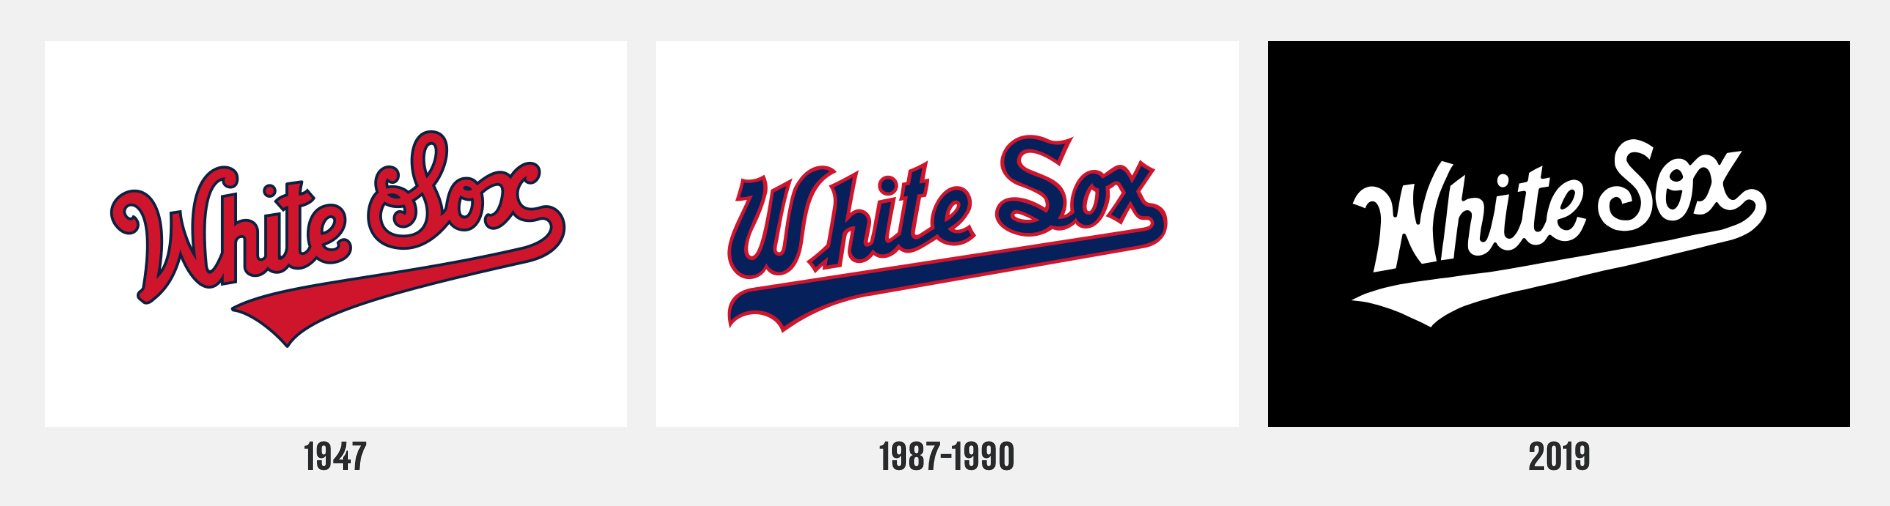 Brand New New Alternate Logo For Chicago White Sox By Contino